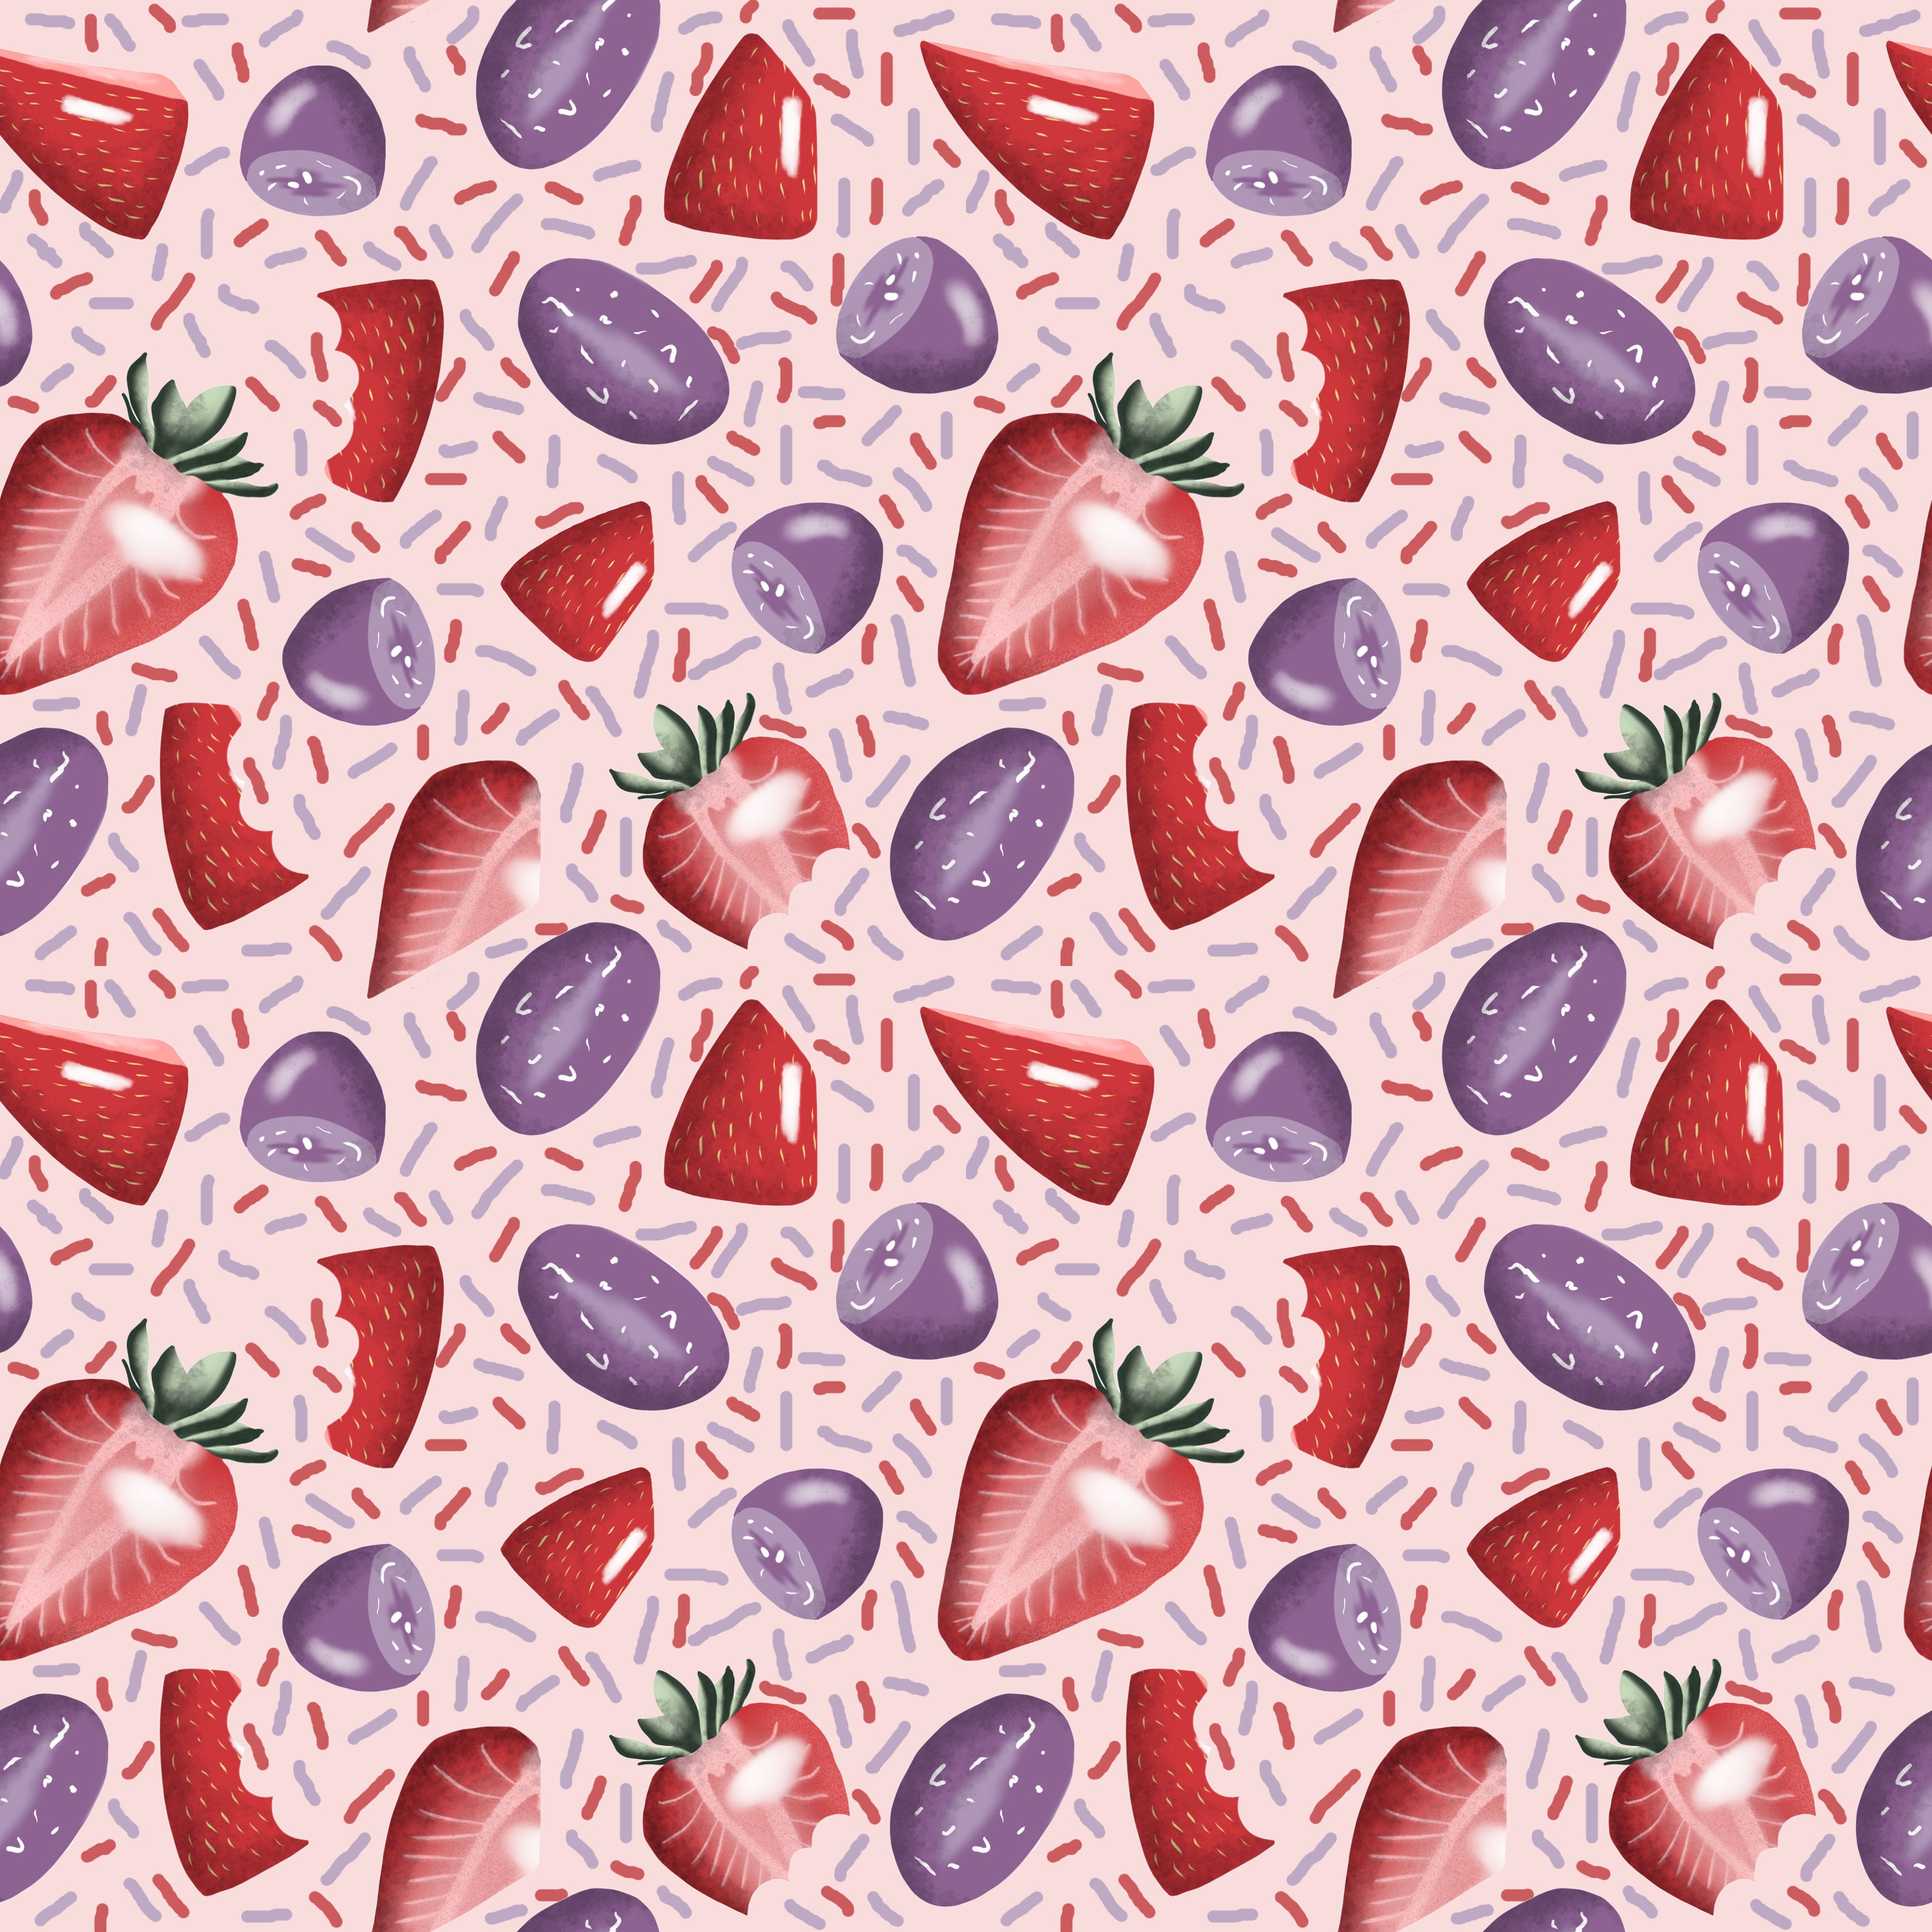 strawberry and grape surface pattern design